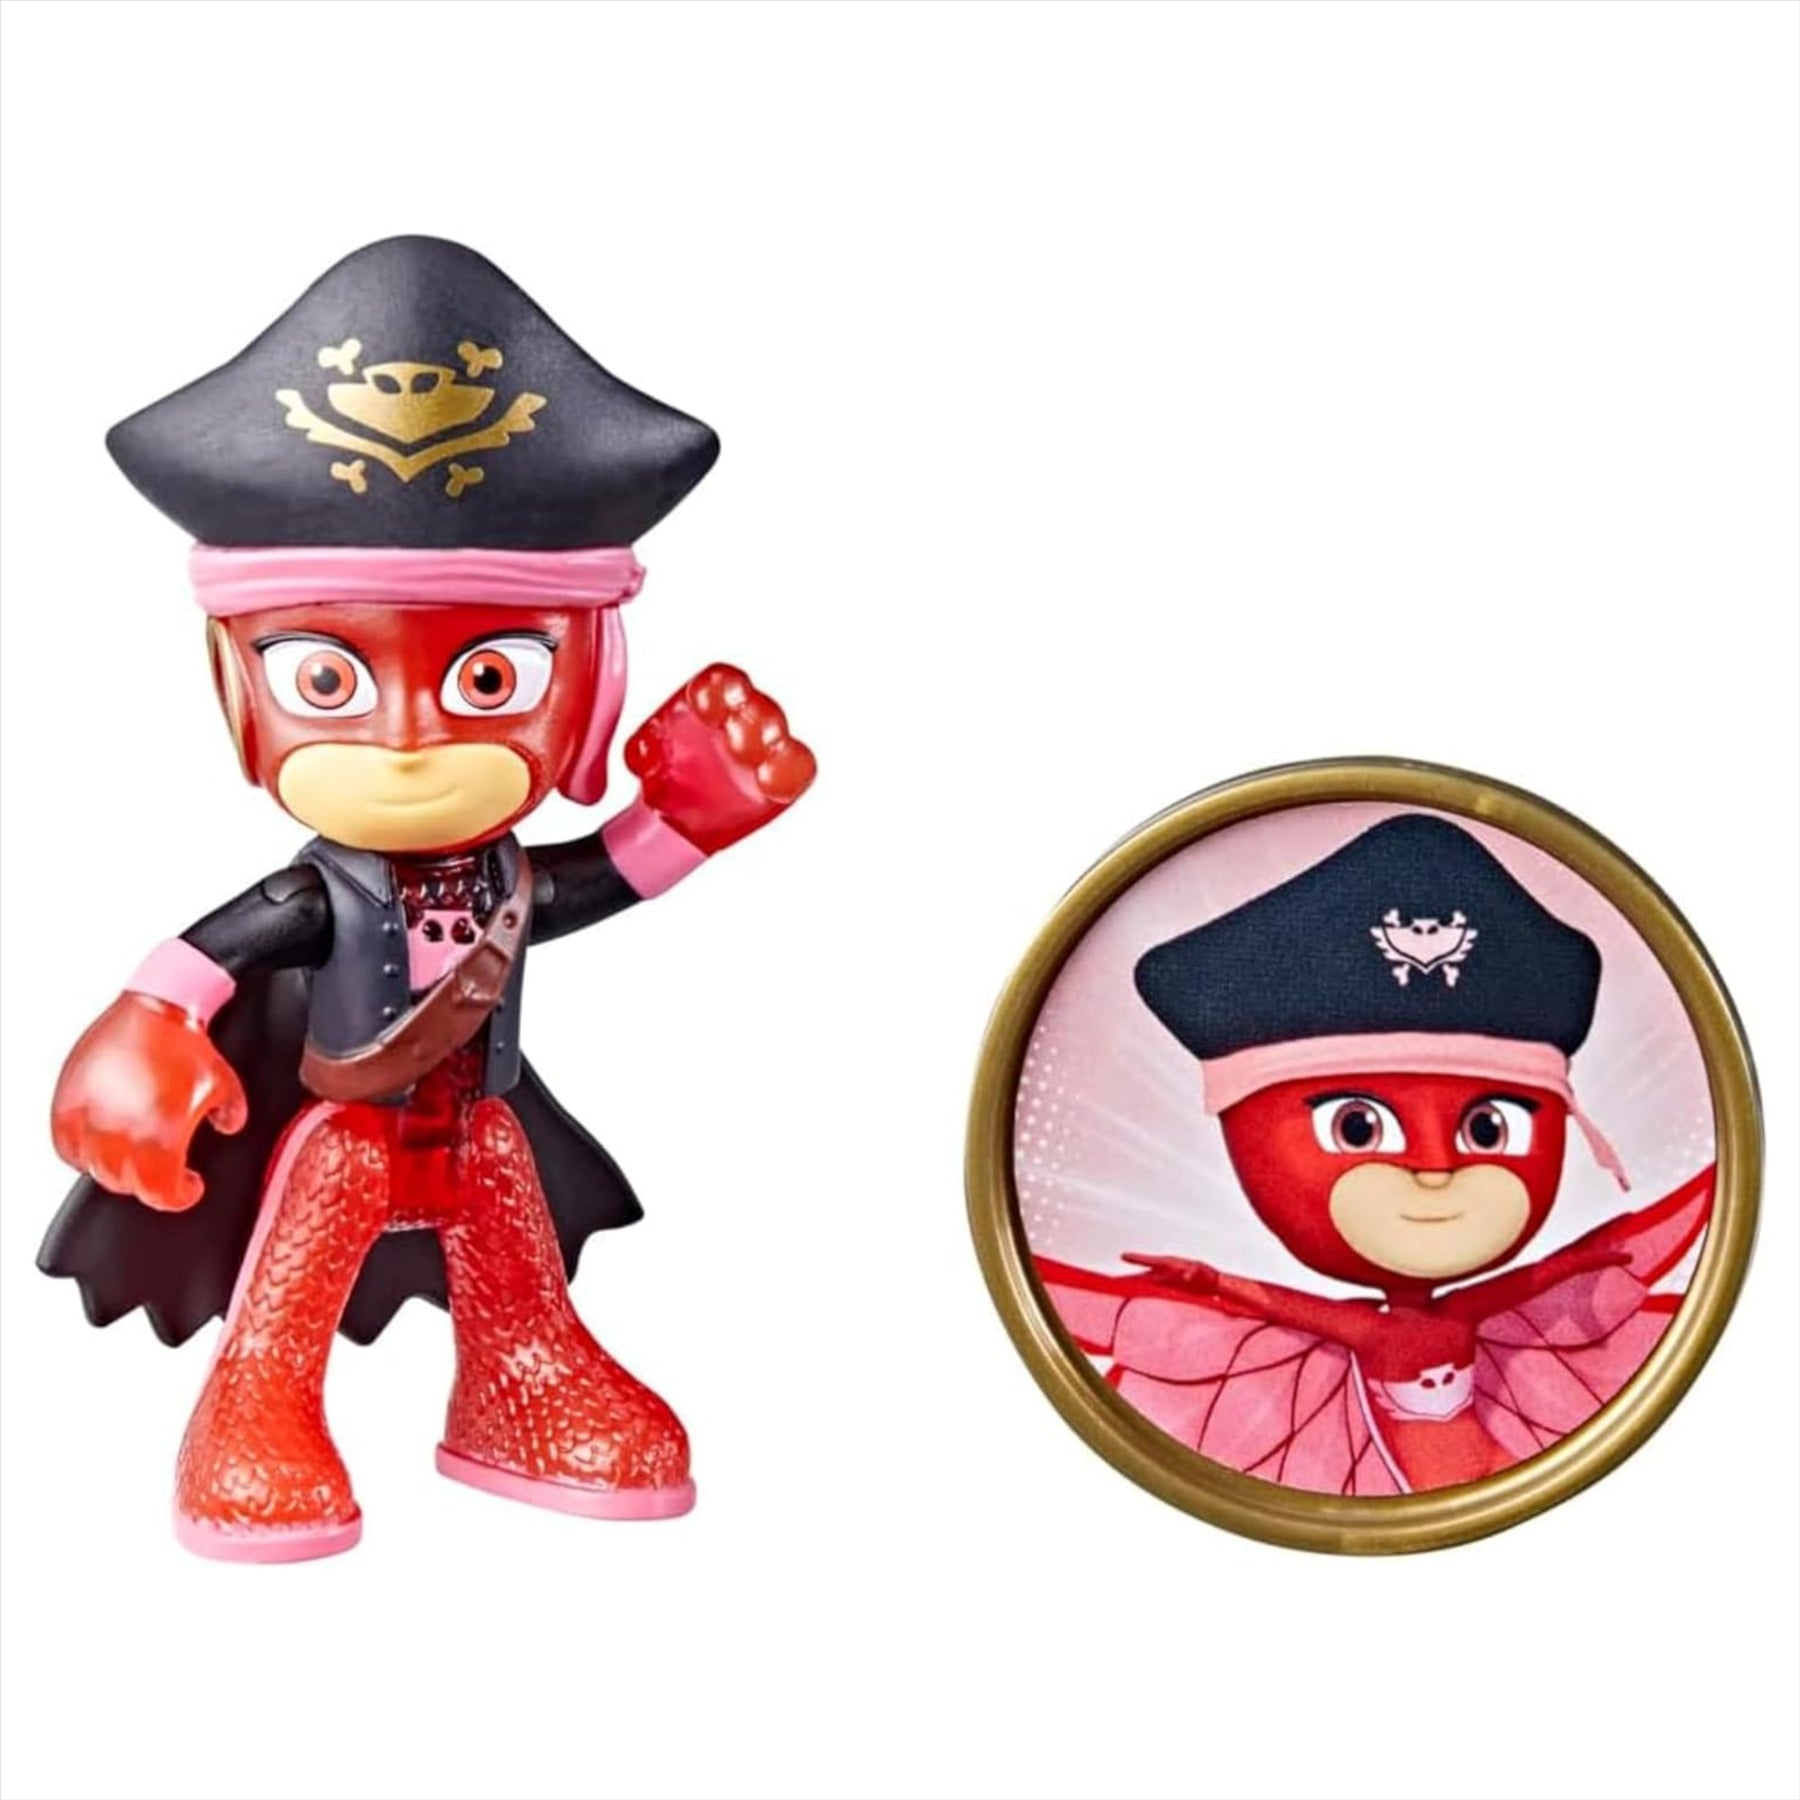 PJ Masks Pirate Power Articulated Play Figures Blind Box Sets - Complete Set of 10 - Toptoys2u